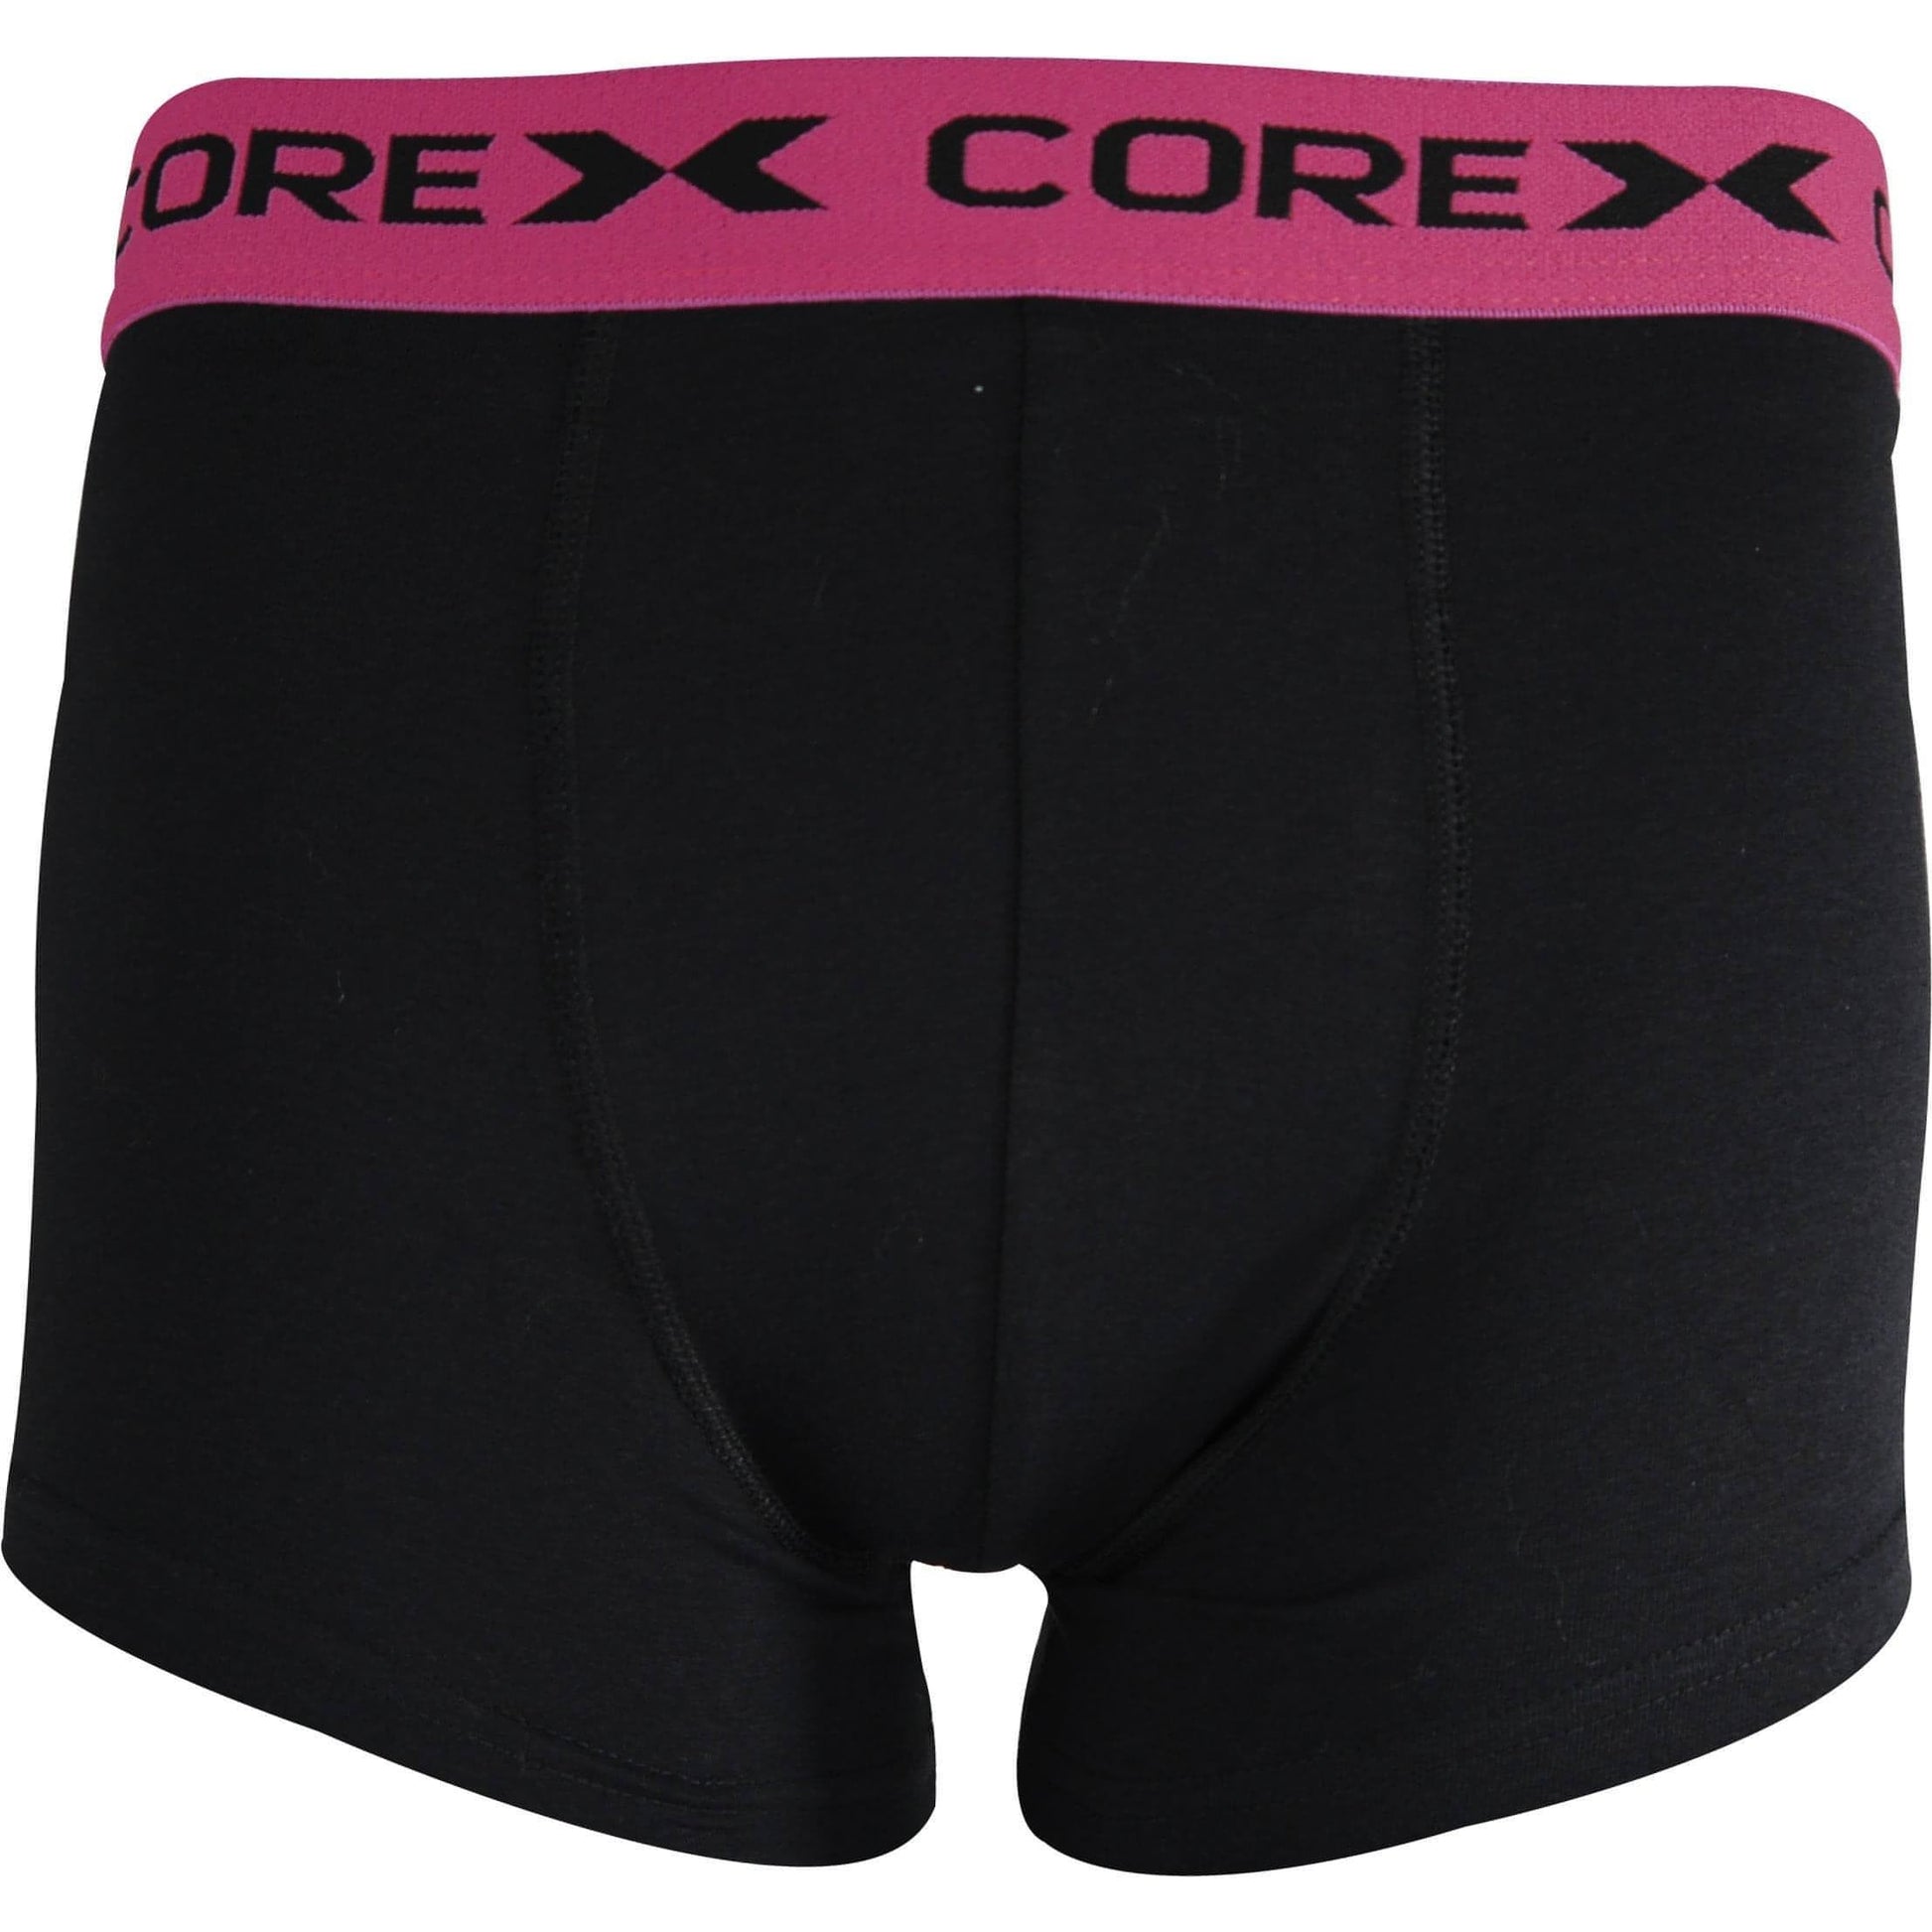 Corex Fitness Classic Pack Boxers 1P204921Wm Raspberrymint Raspberry Front - Front View